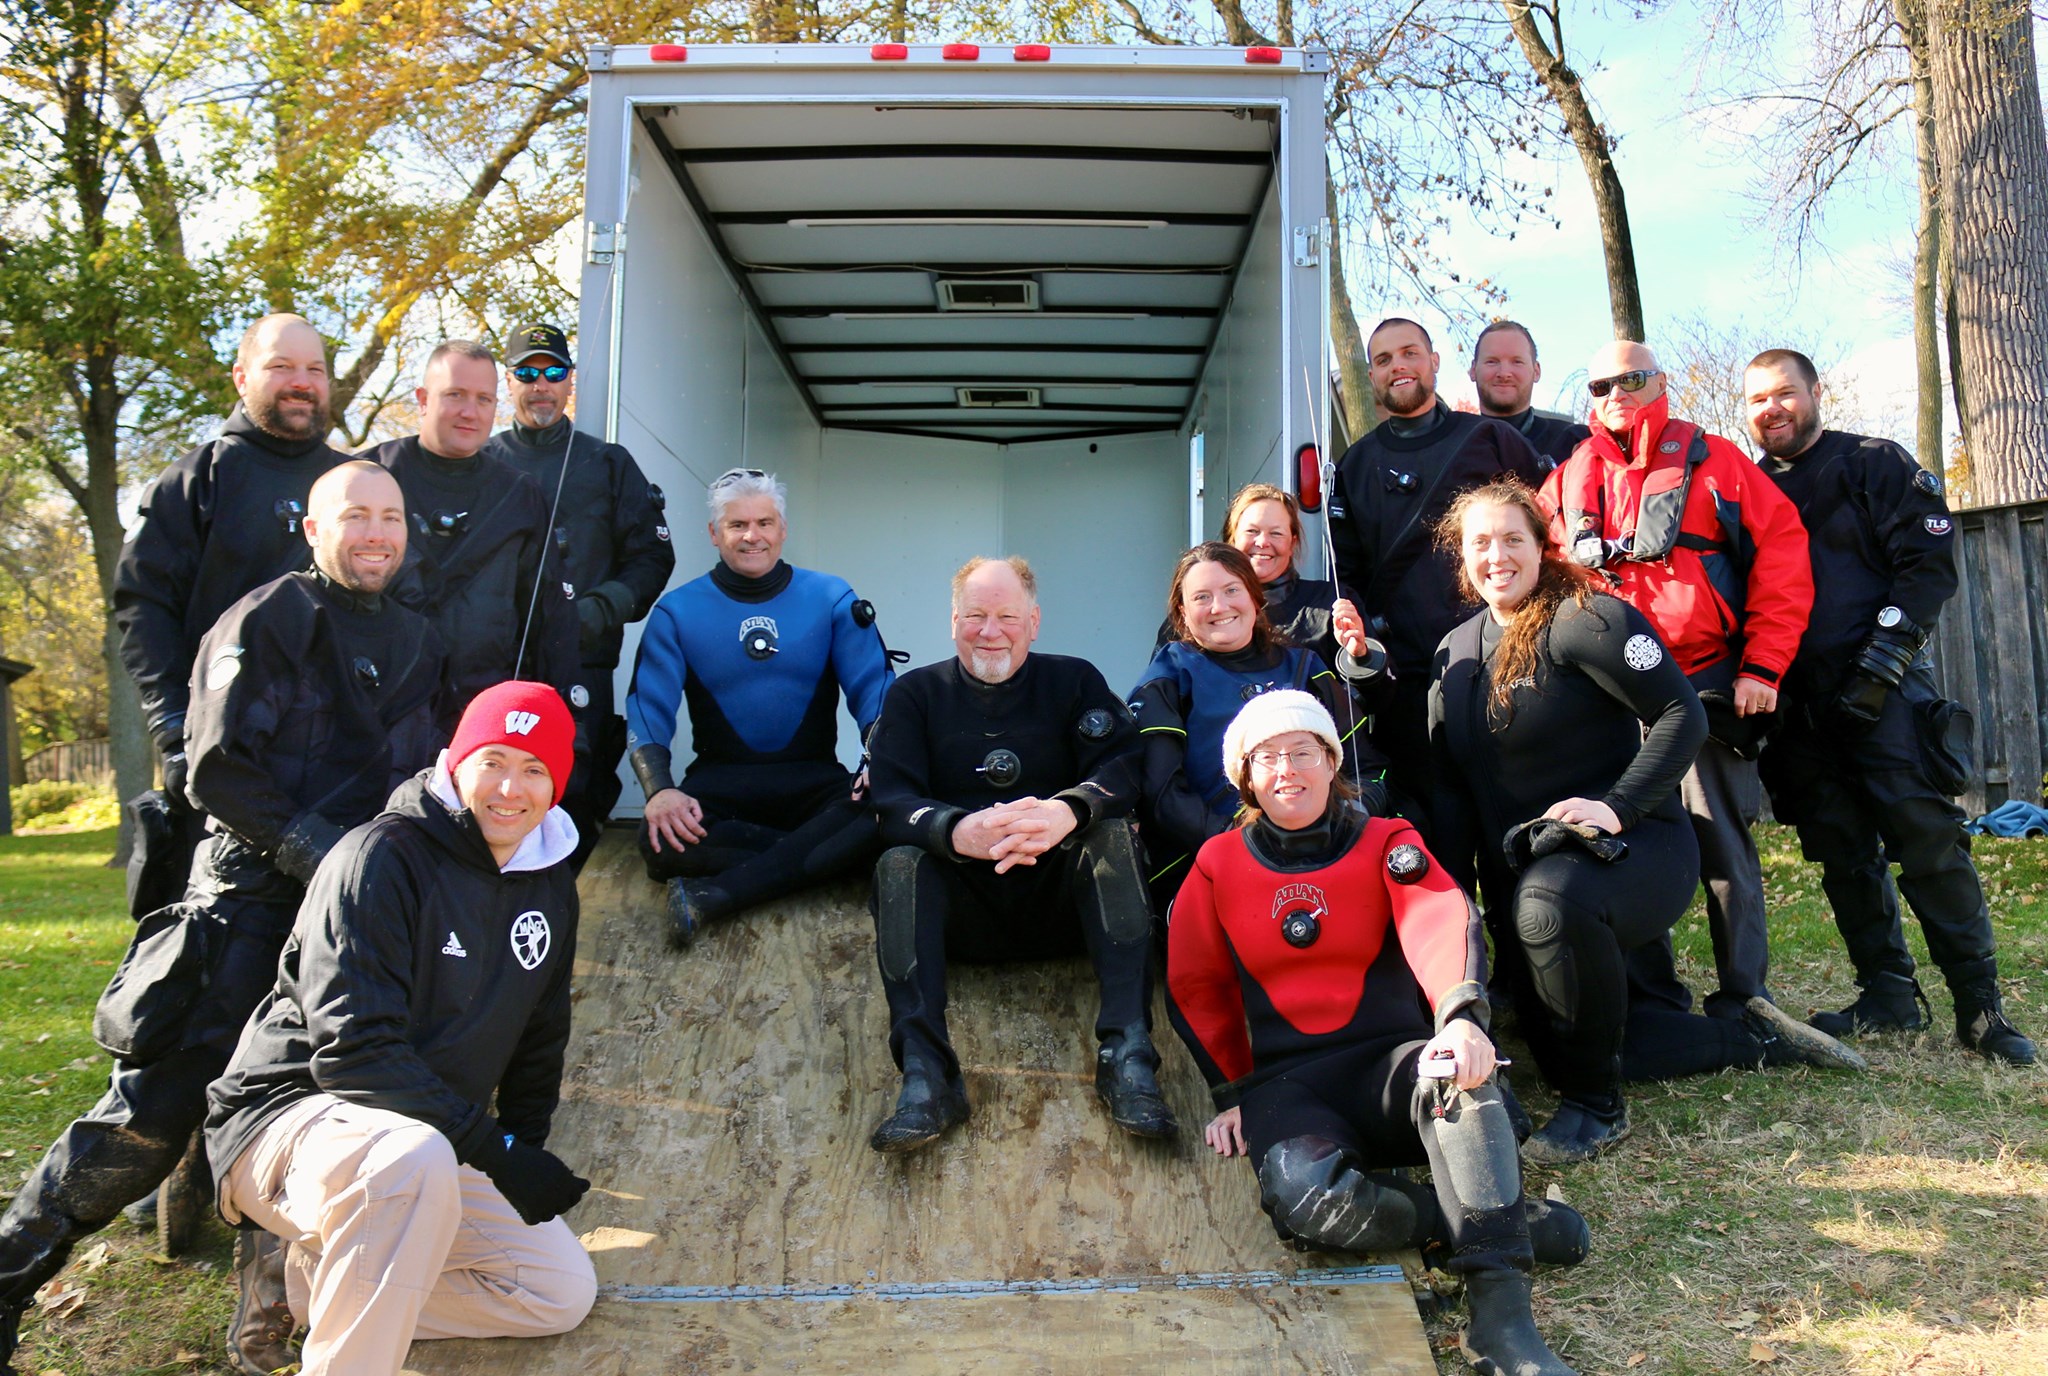 After a long day, archaeologists and divers paused for a photo with the circa A.D. 800 dugout canoe after a successful recovery from Lake Mendota.